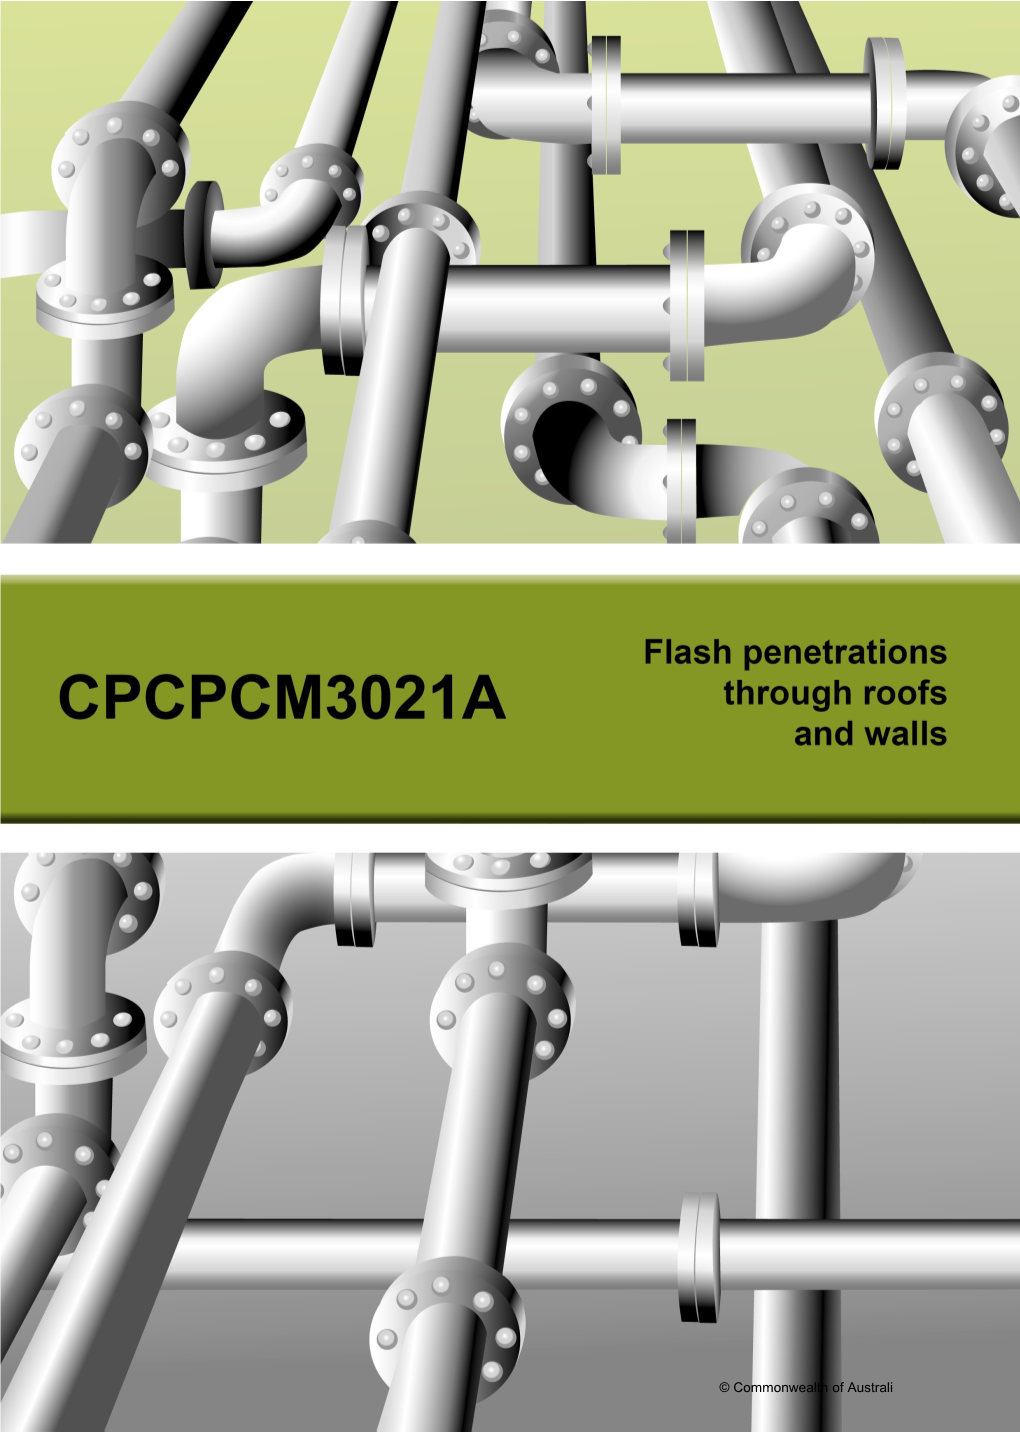 Cpcpcm3021a - Flash Penetrations Through Walls and Roofs